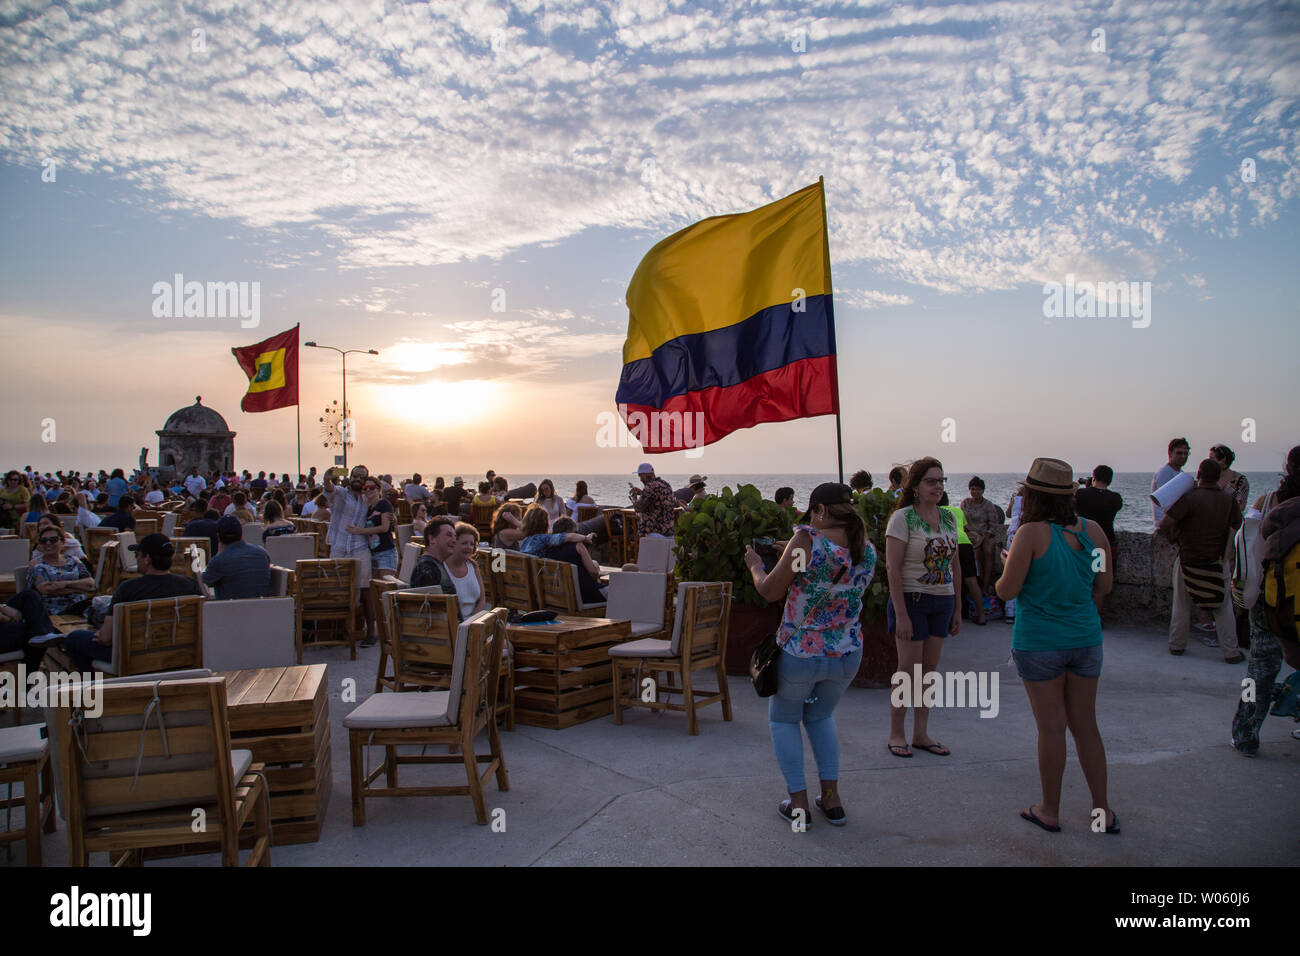 A sunset in Cartagena, Colombia, with the Colombian flag flying in the foreground, at the famous Cafe Del Mar, a tourist spot. Stock Photo